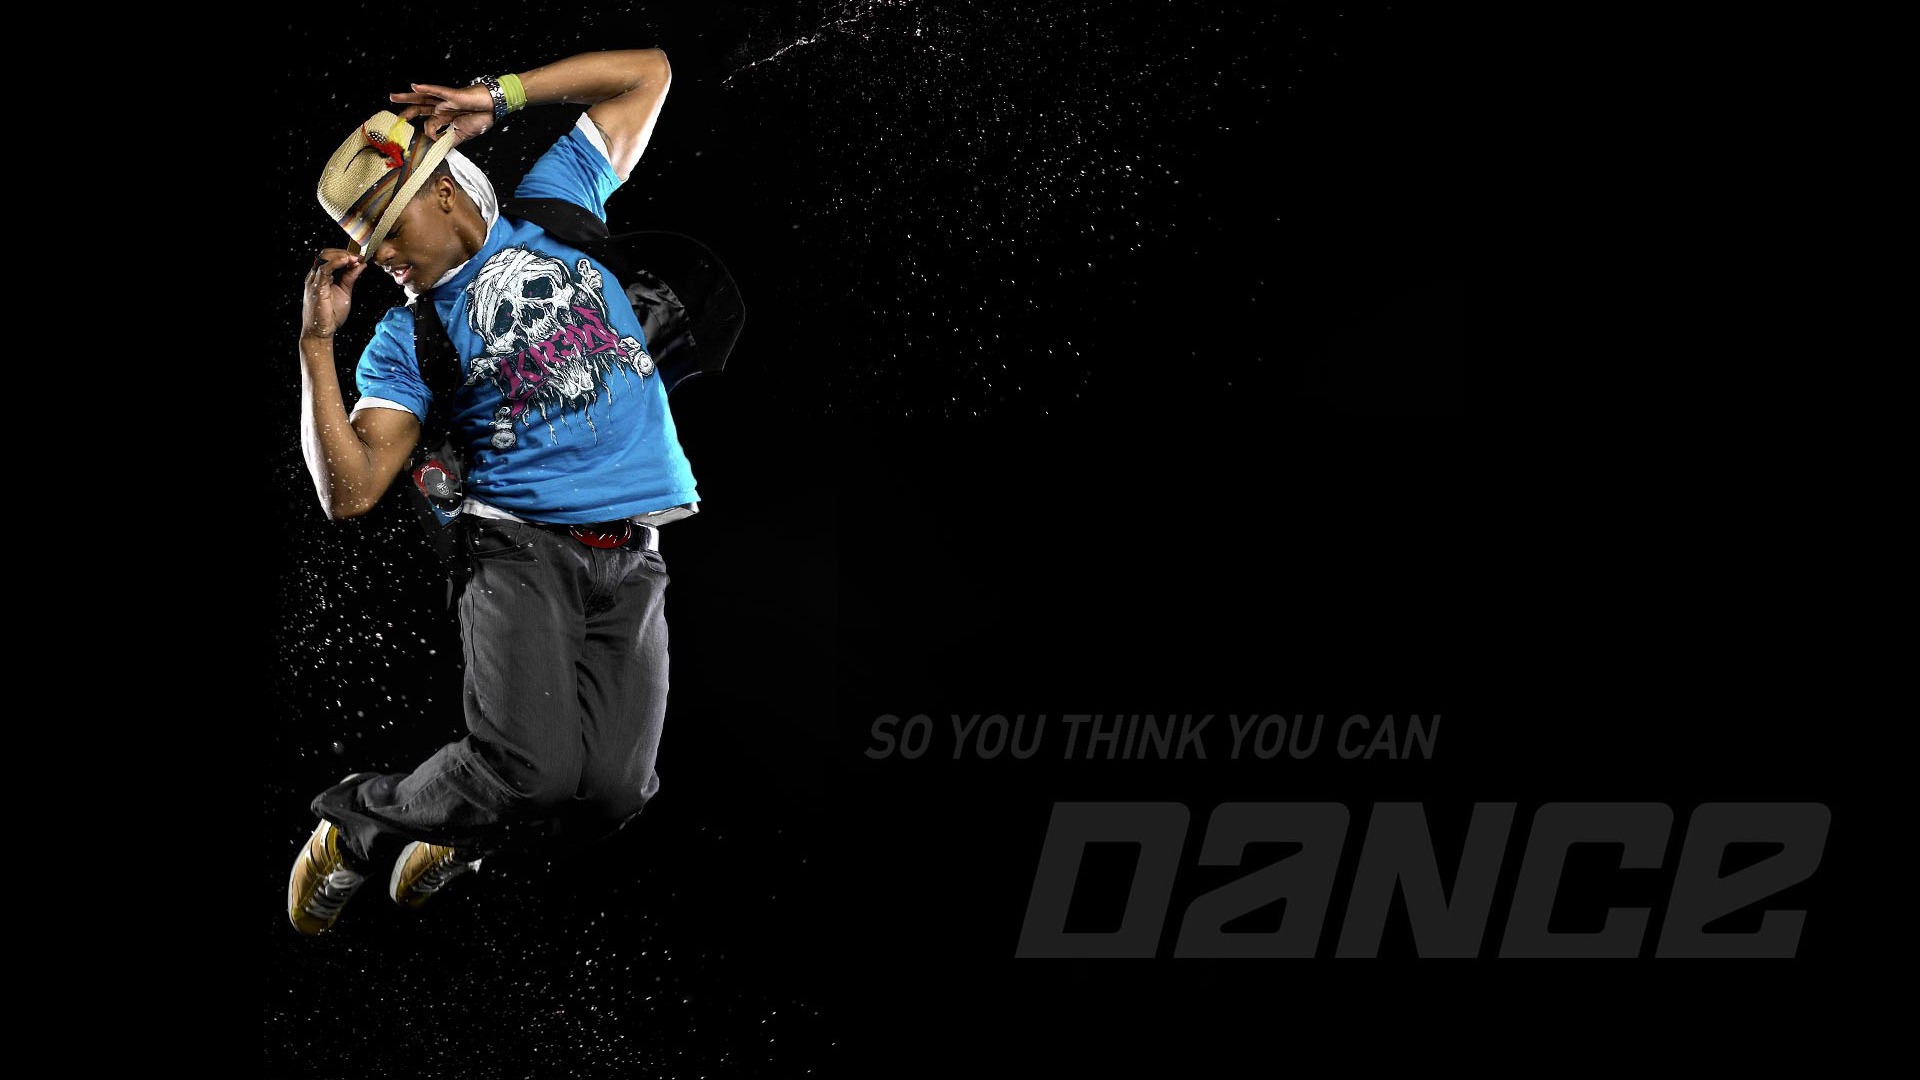 So You Think You Can Dance wallpaper (1) #20 - 1920x1080